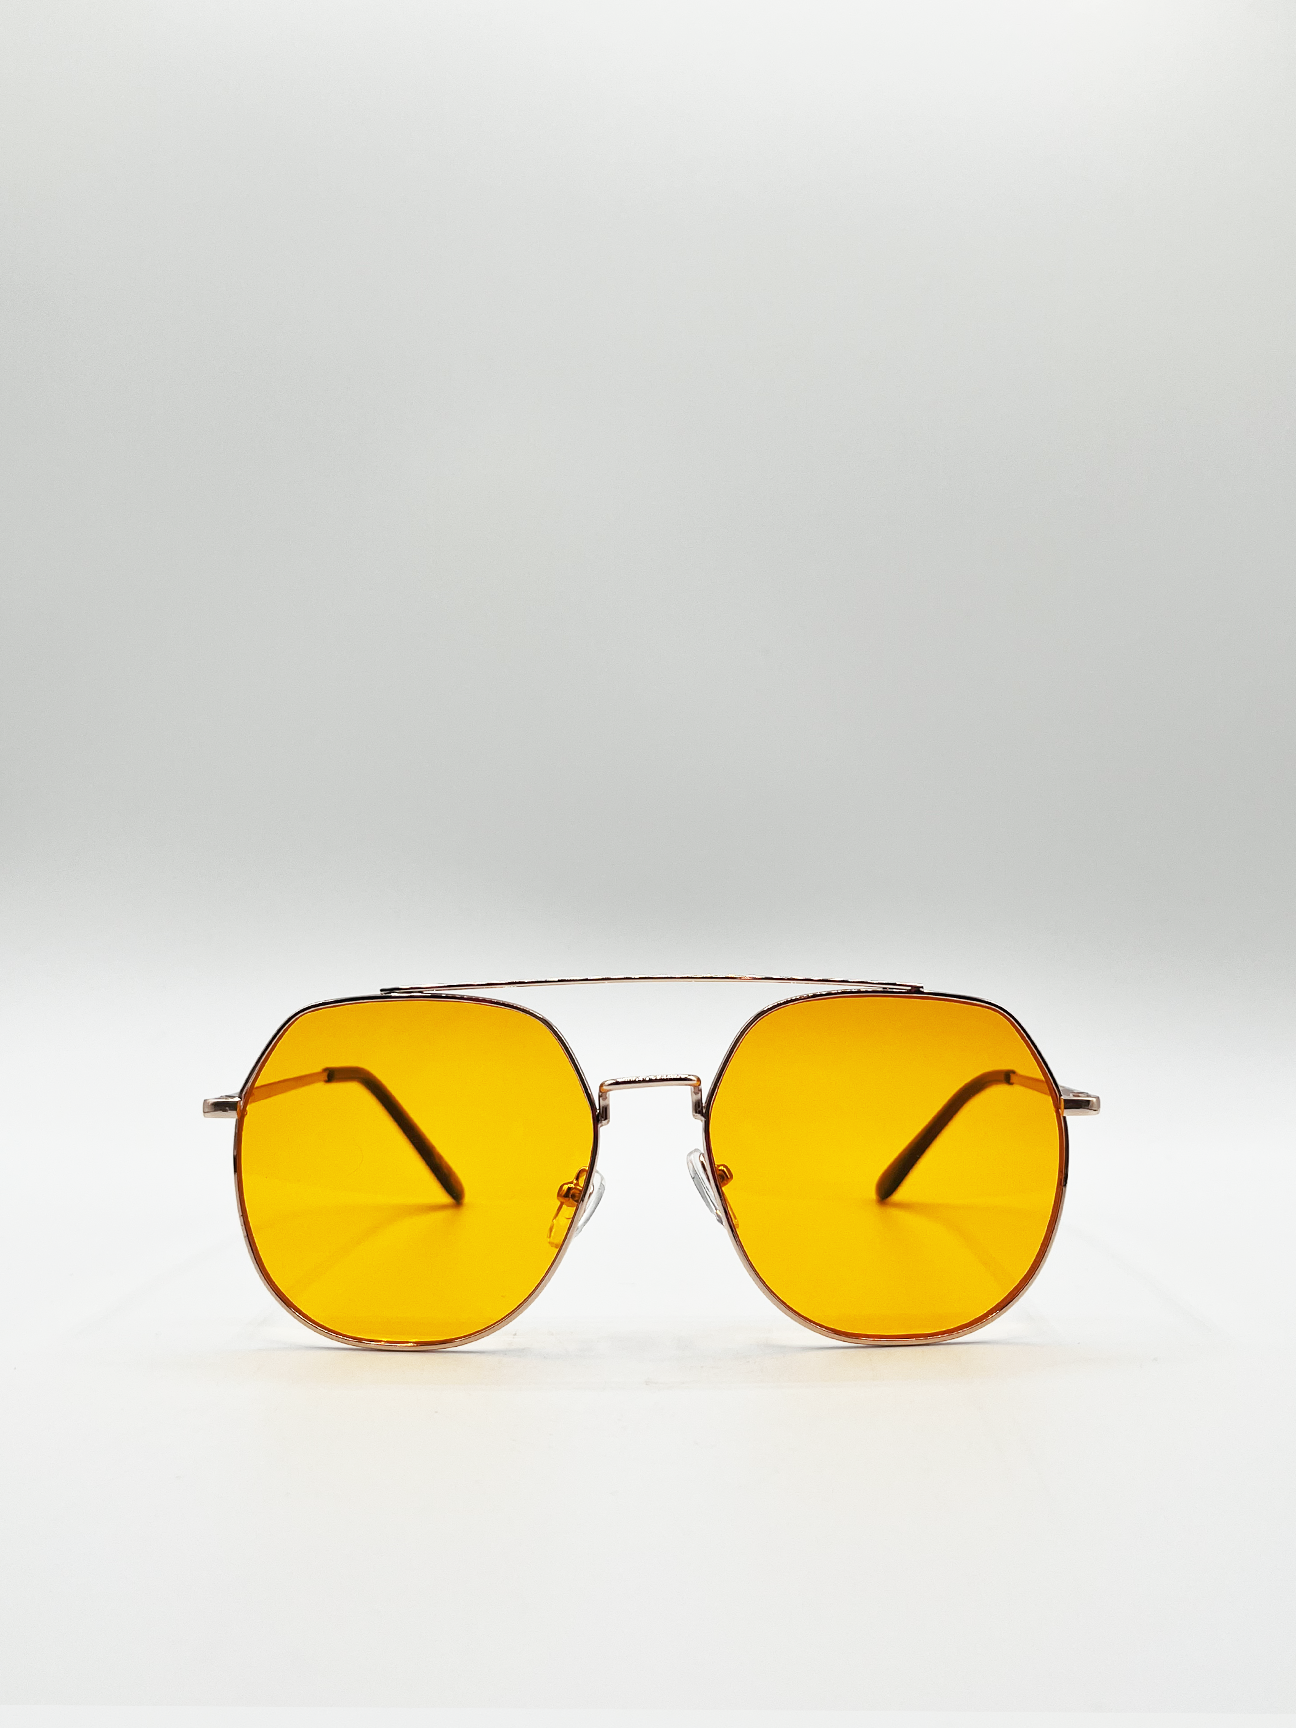 Oversized Aviator Style Sunglasses with Yellow Lenses